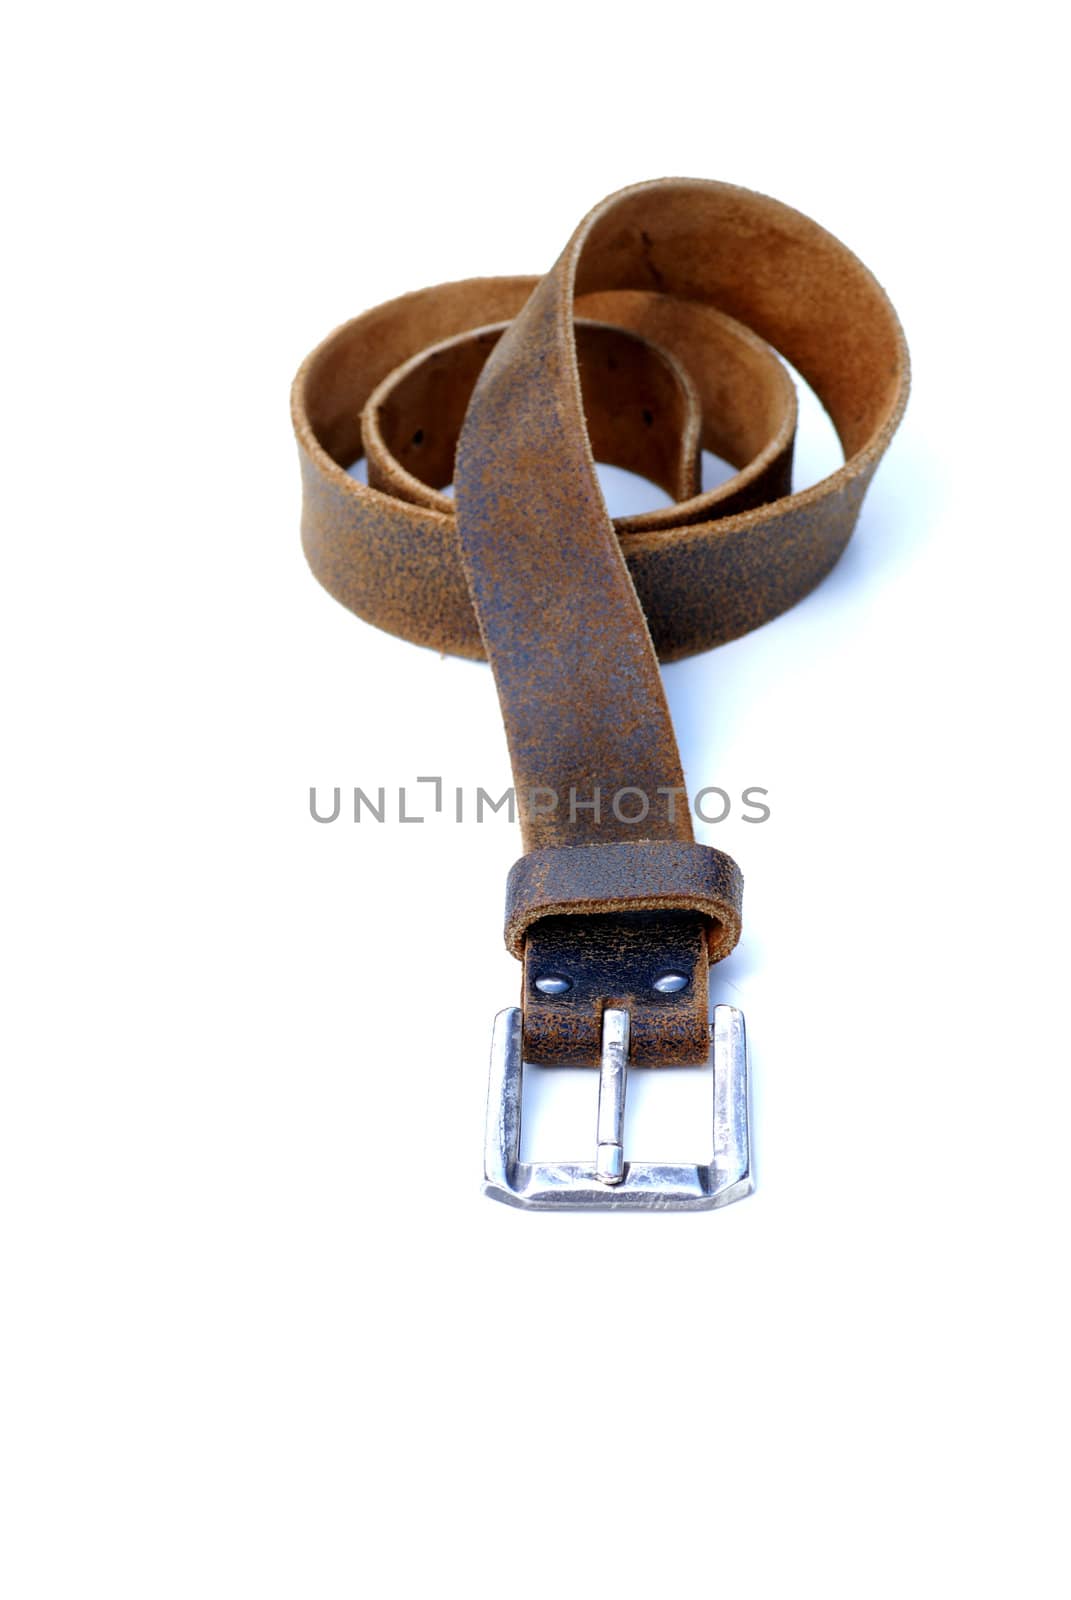 An isolated brown leather belt.